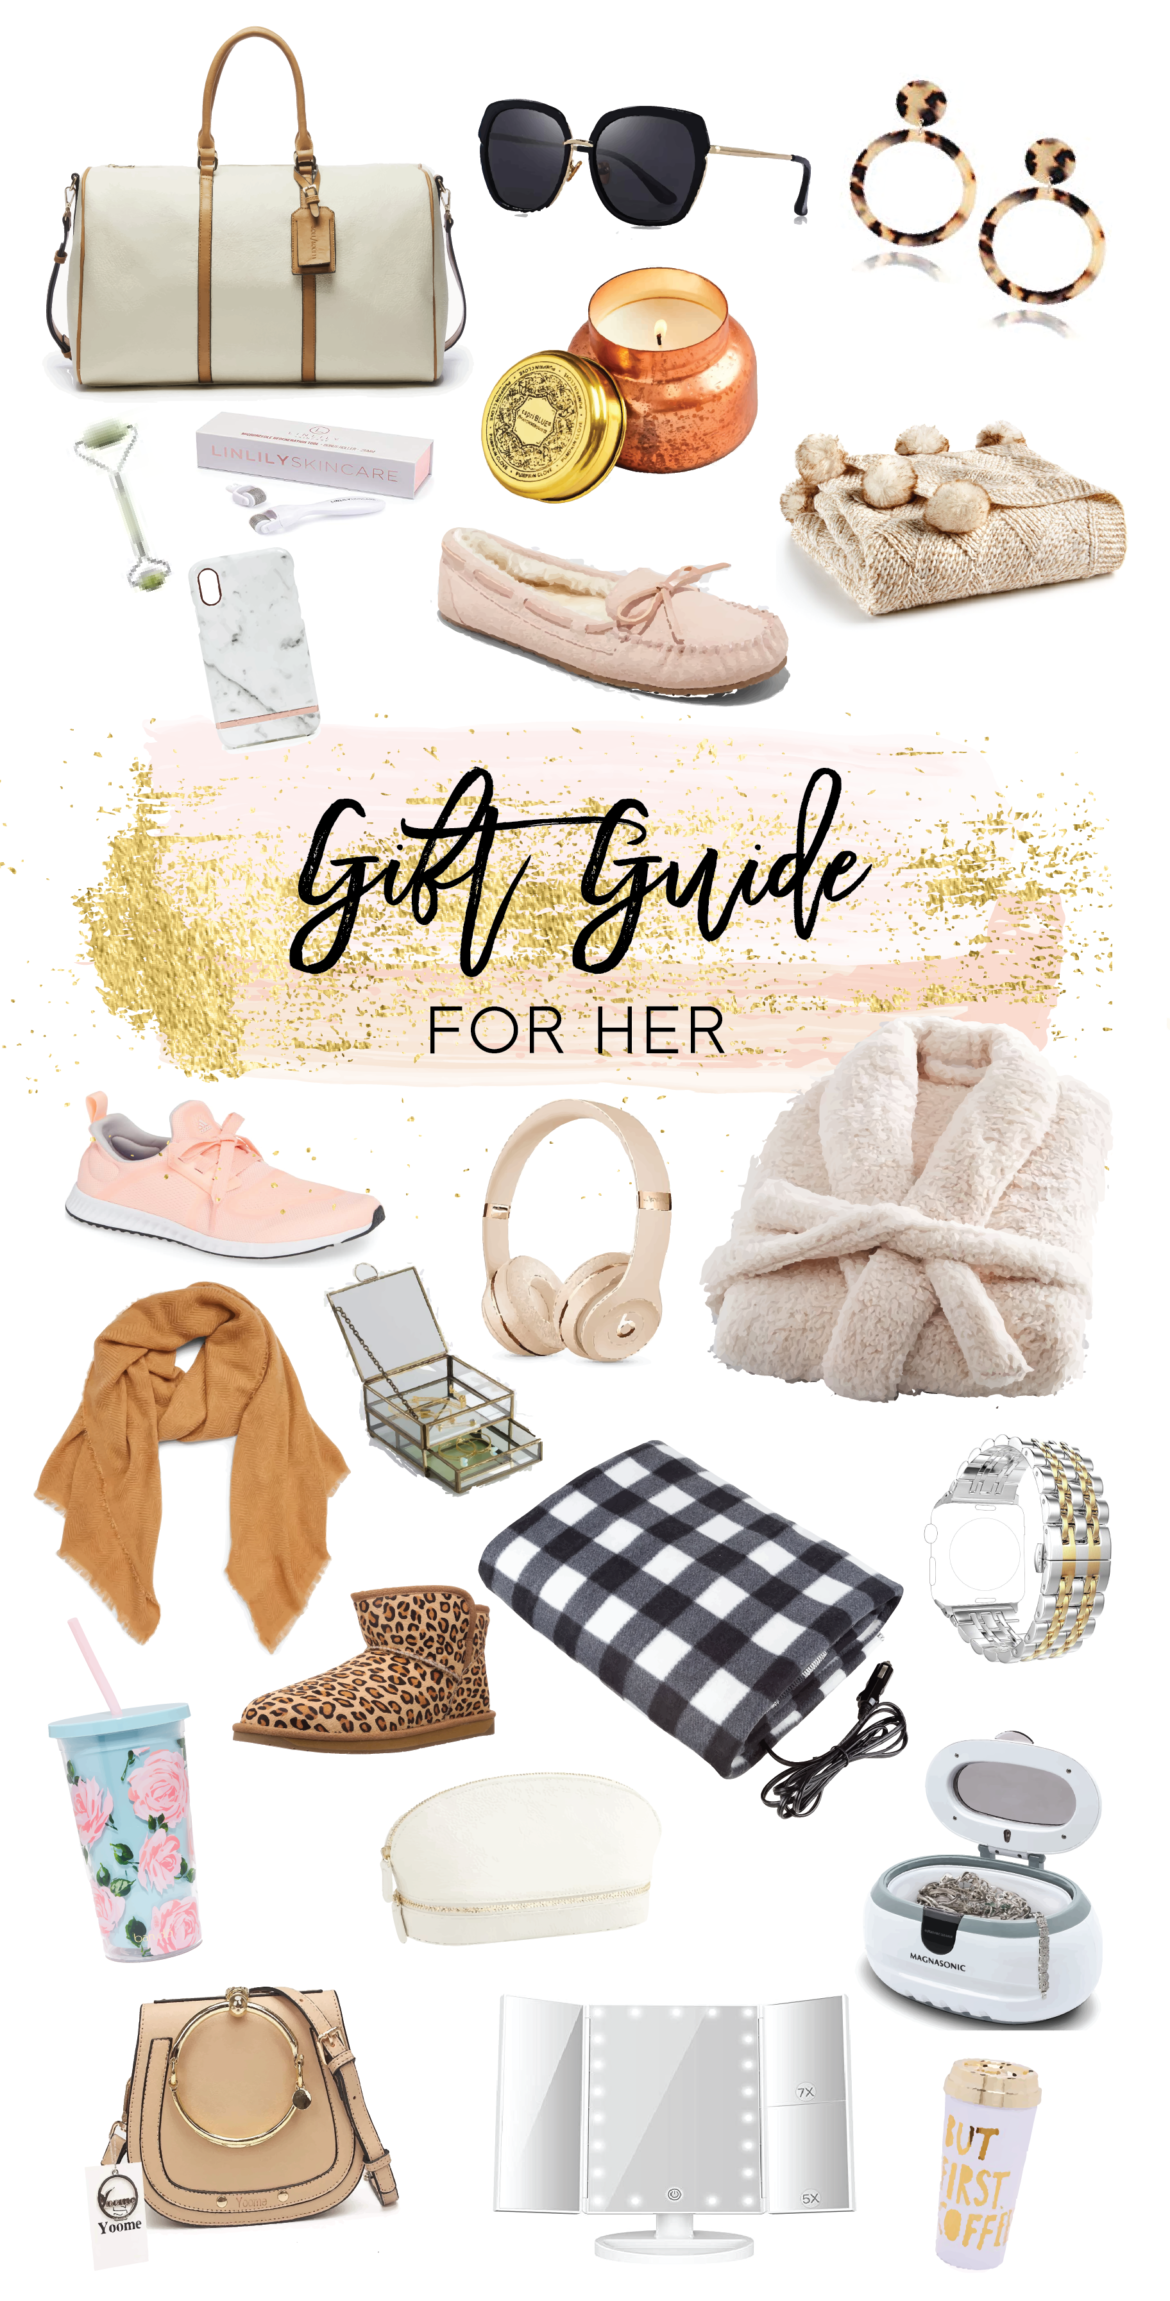 https://thesouthernpeony.com/wp-content/uploads/2018/11/giftguide@3x-e1541787001179-1170x2301.png